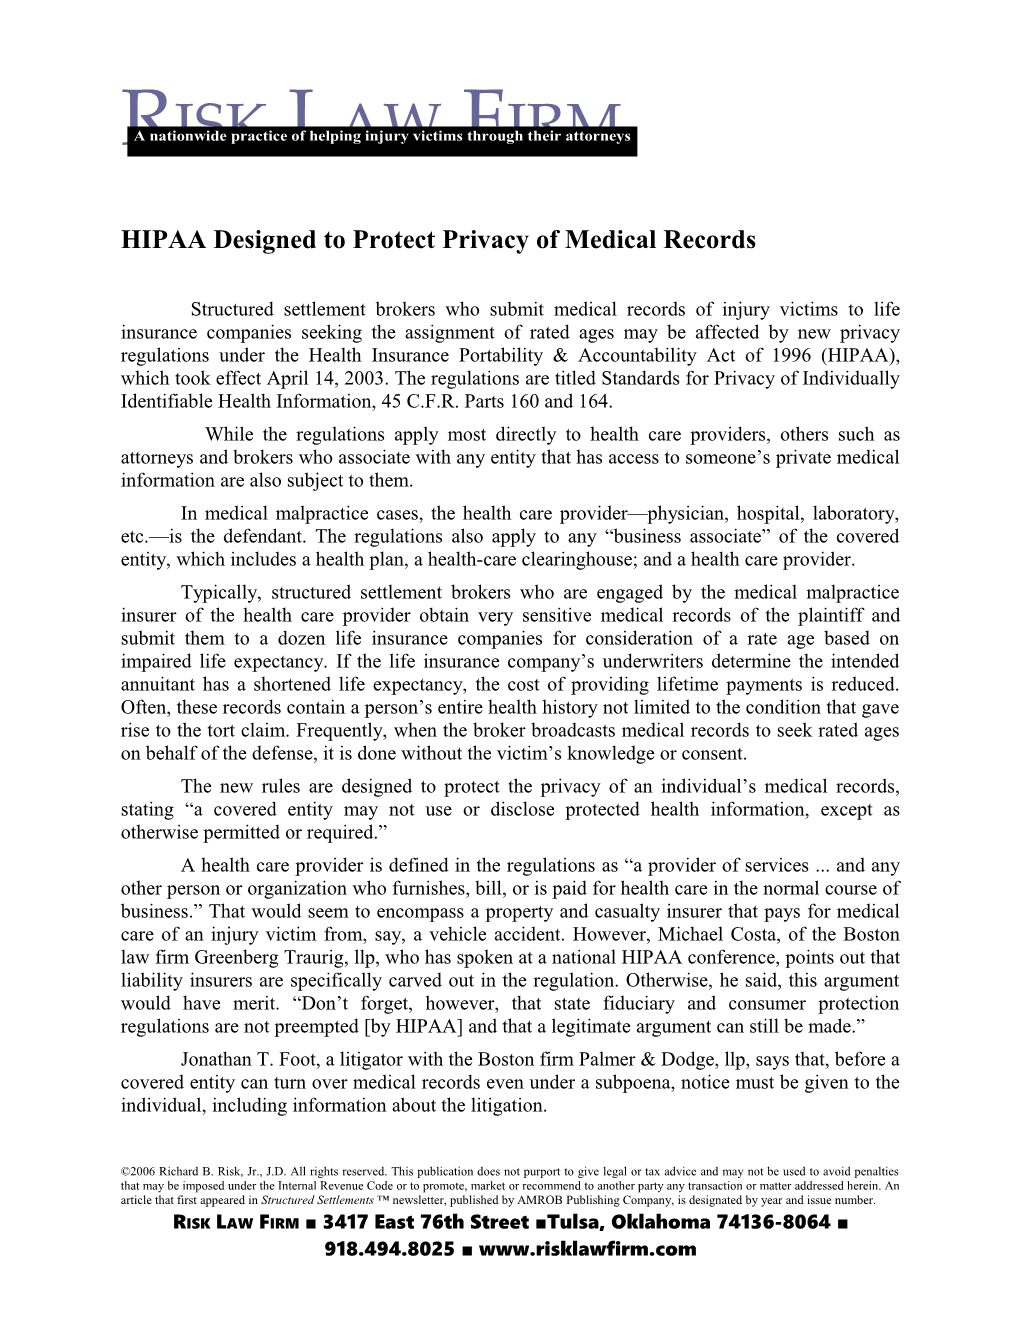 HIPAA Designed to Protect Privacy of Medical Records